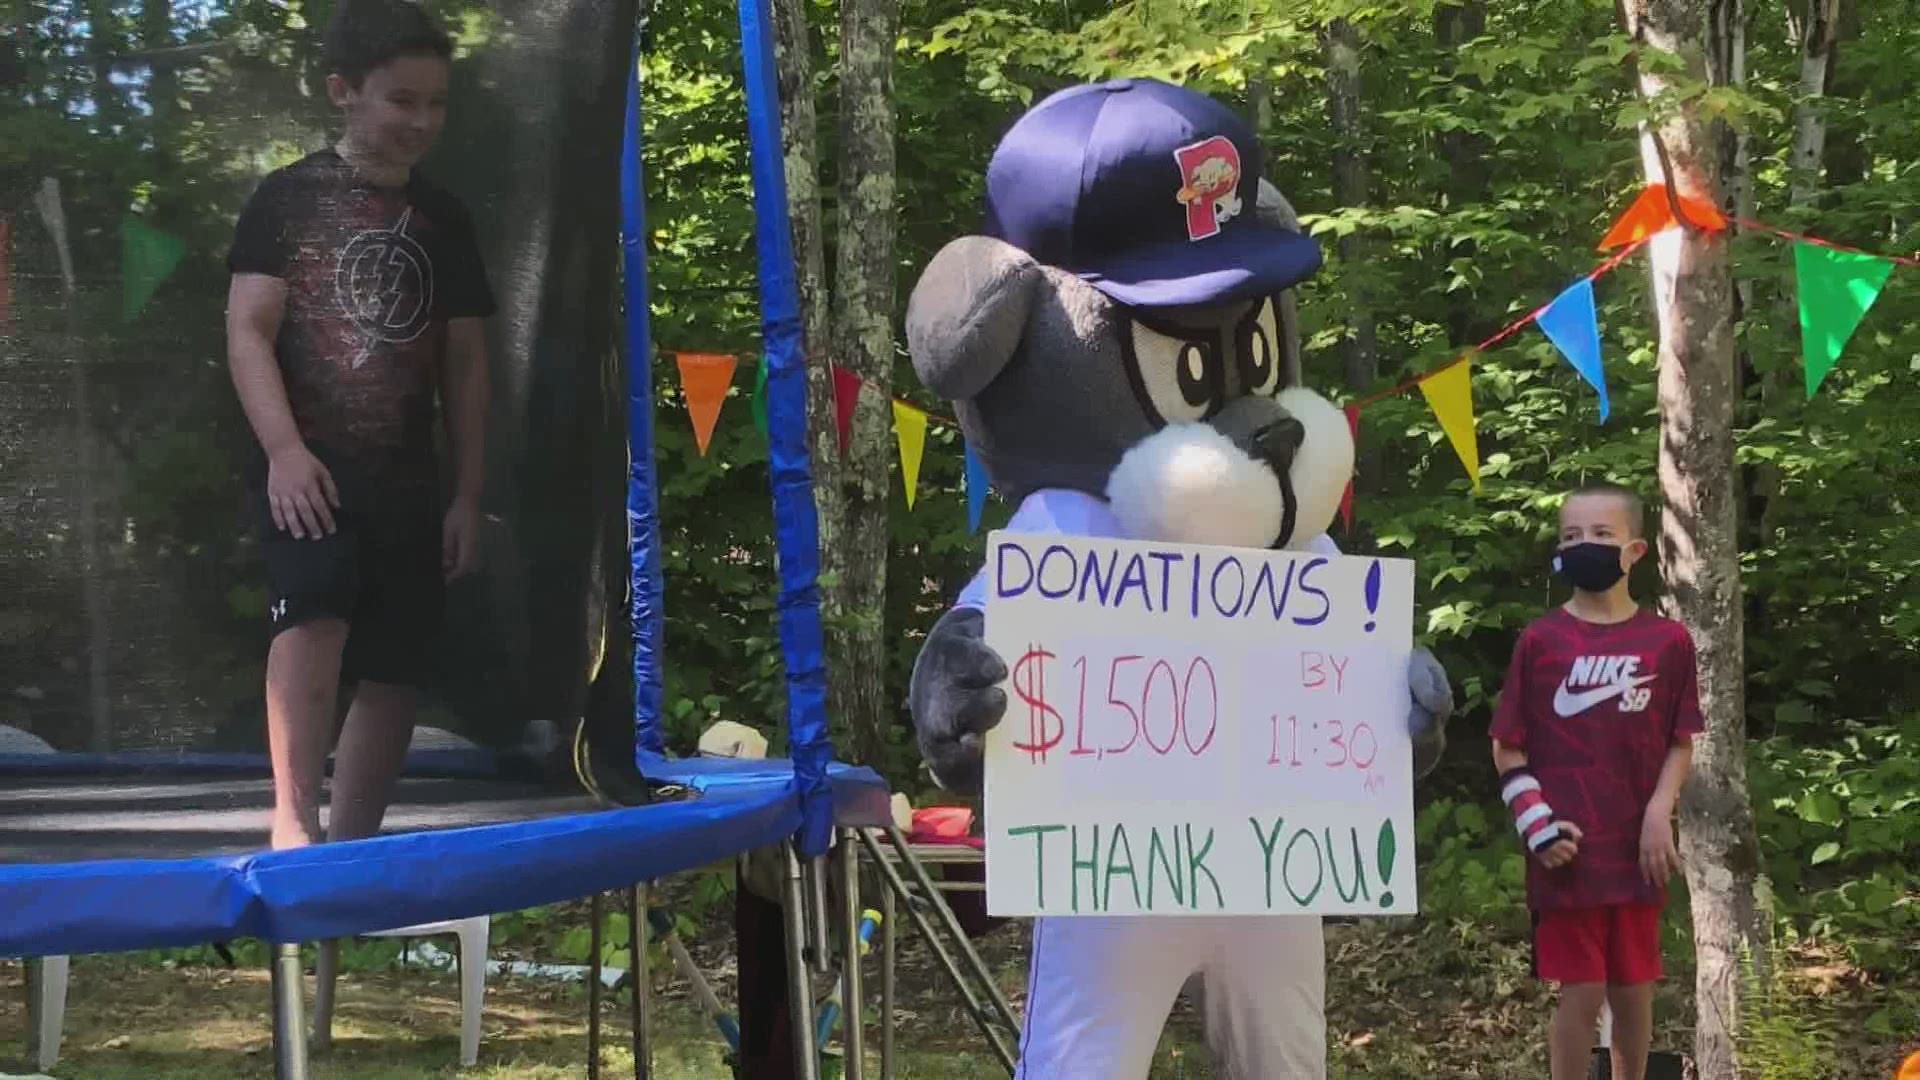 10-year-old Jackson Welch spent 24 hours on a trampoline to raise money and help the Animal Refuge League of Greater Portland.